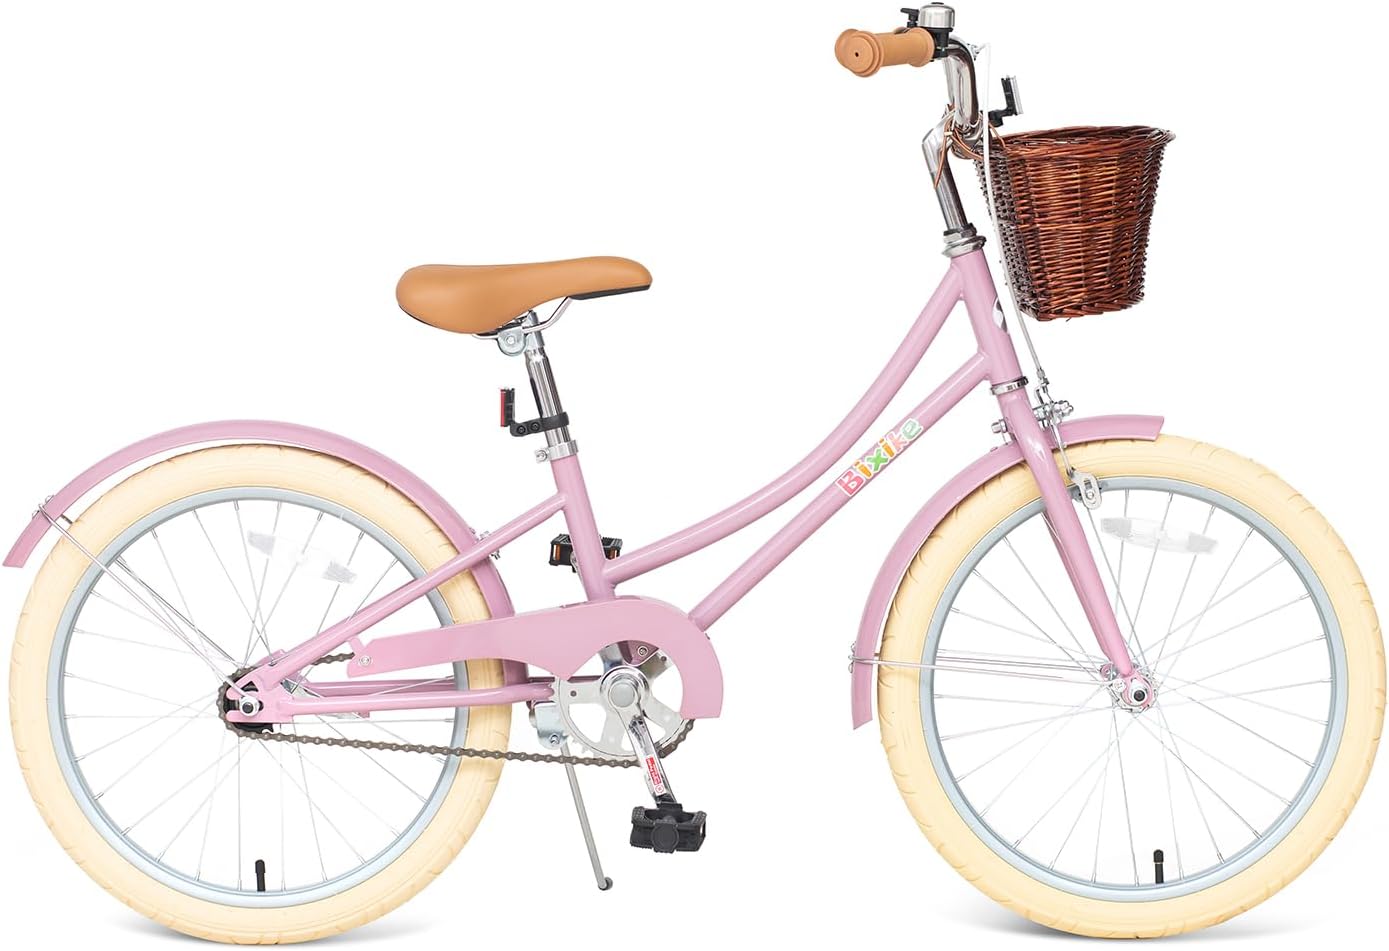 Retro Design Girls Bike with Basket for 5-13 Years Old Kids, 16 Inch Kid Bicycle - $115